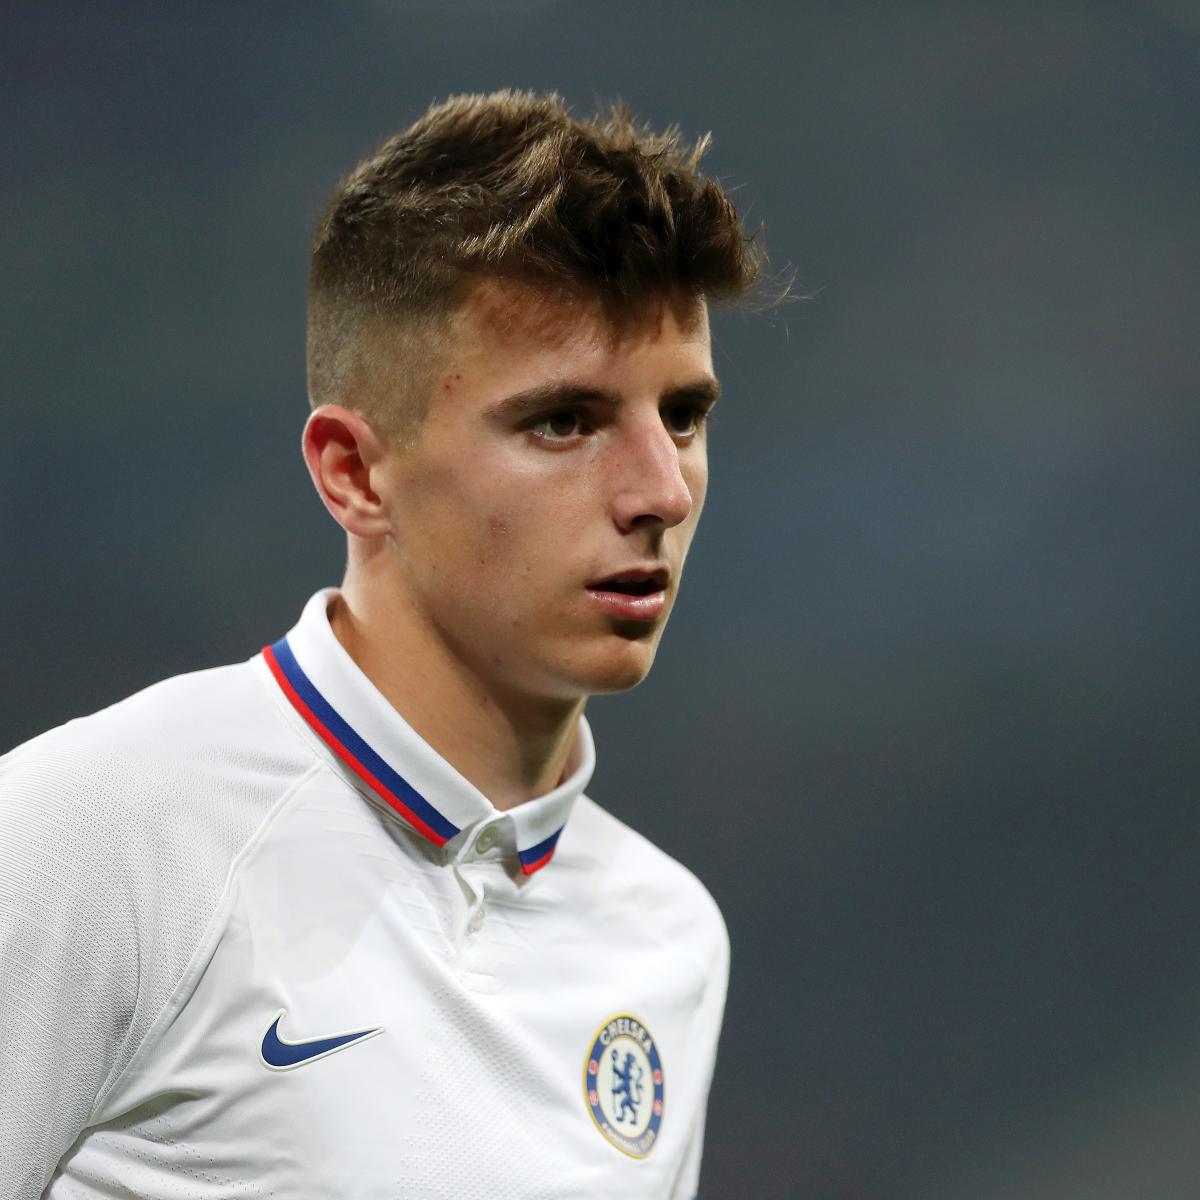 Chelsea S Mason Mount Similar To Frank Lampard Says Gus Poyet Bleacher Report Latest News Videos And Highlights